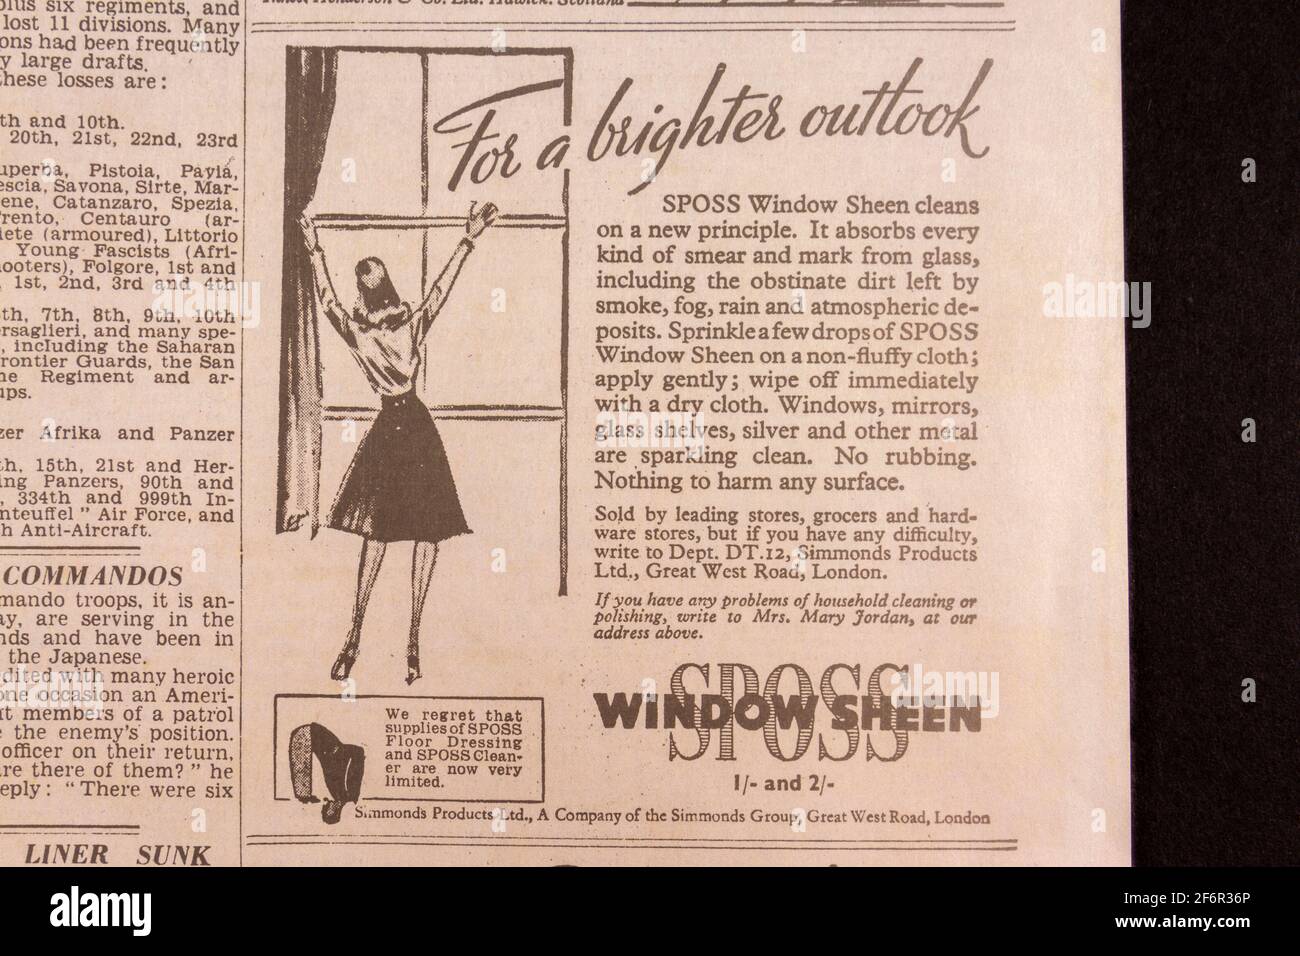 Advert for SPOSS Window Sheen in the Daily Telegraph (replica), 18th May 1943, the day after the Dam Busters raid. Stock Photo